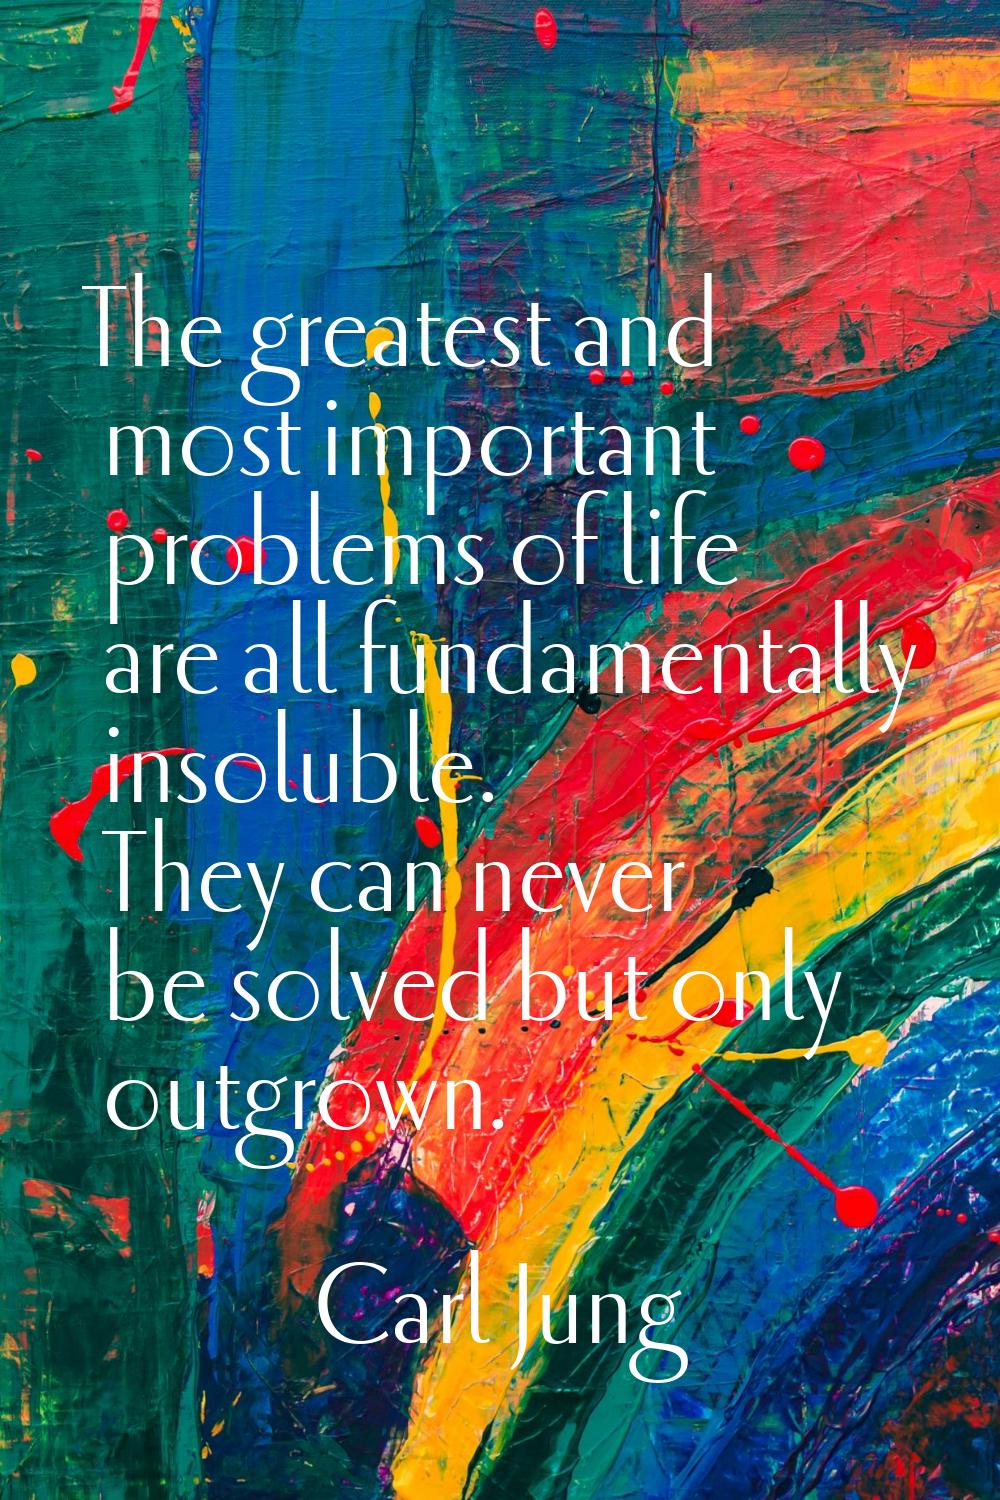 The greatest and most important problems of life are all fundamentally insoluble. They can never be